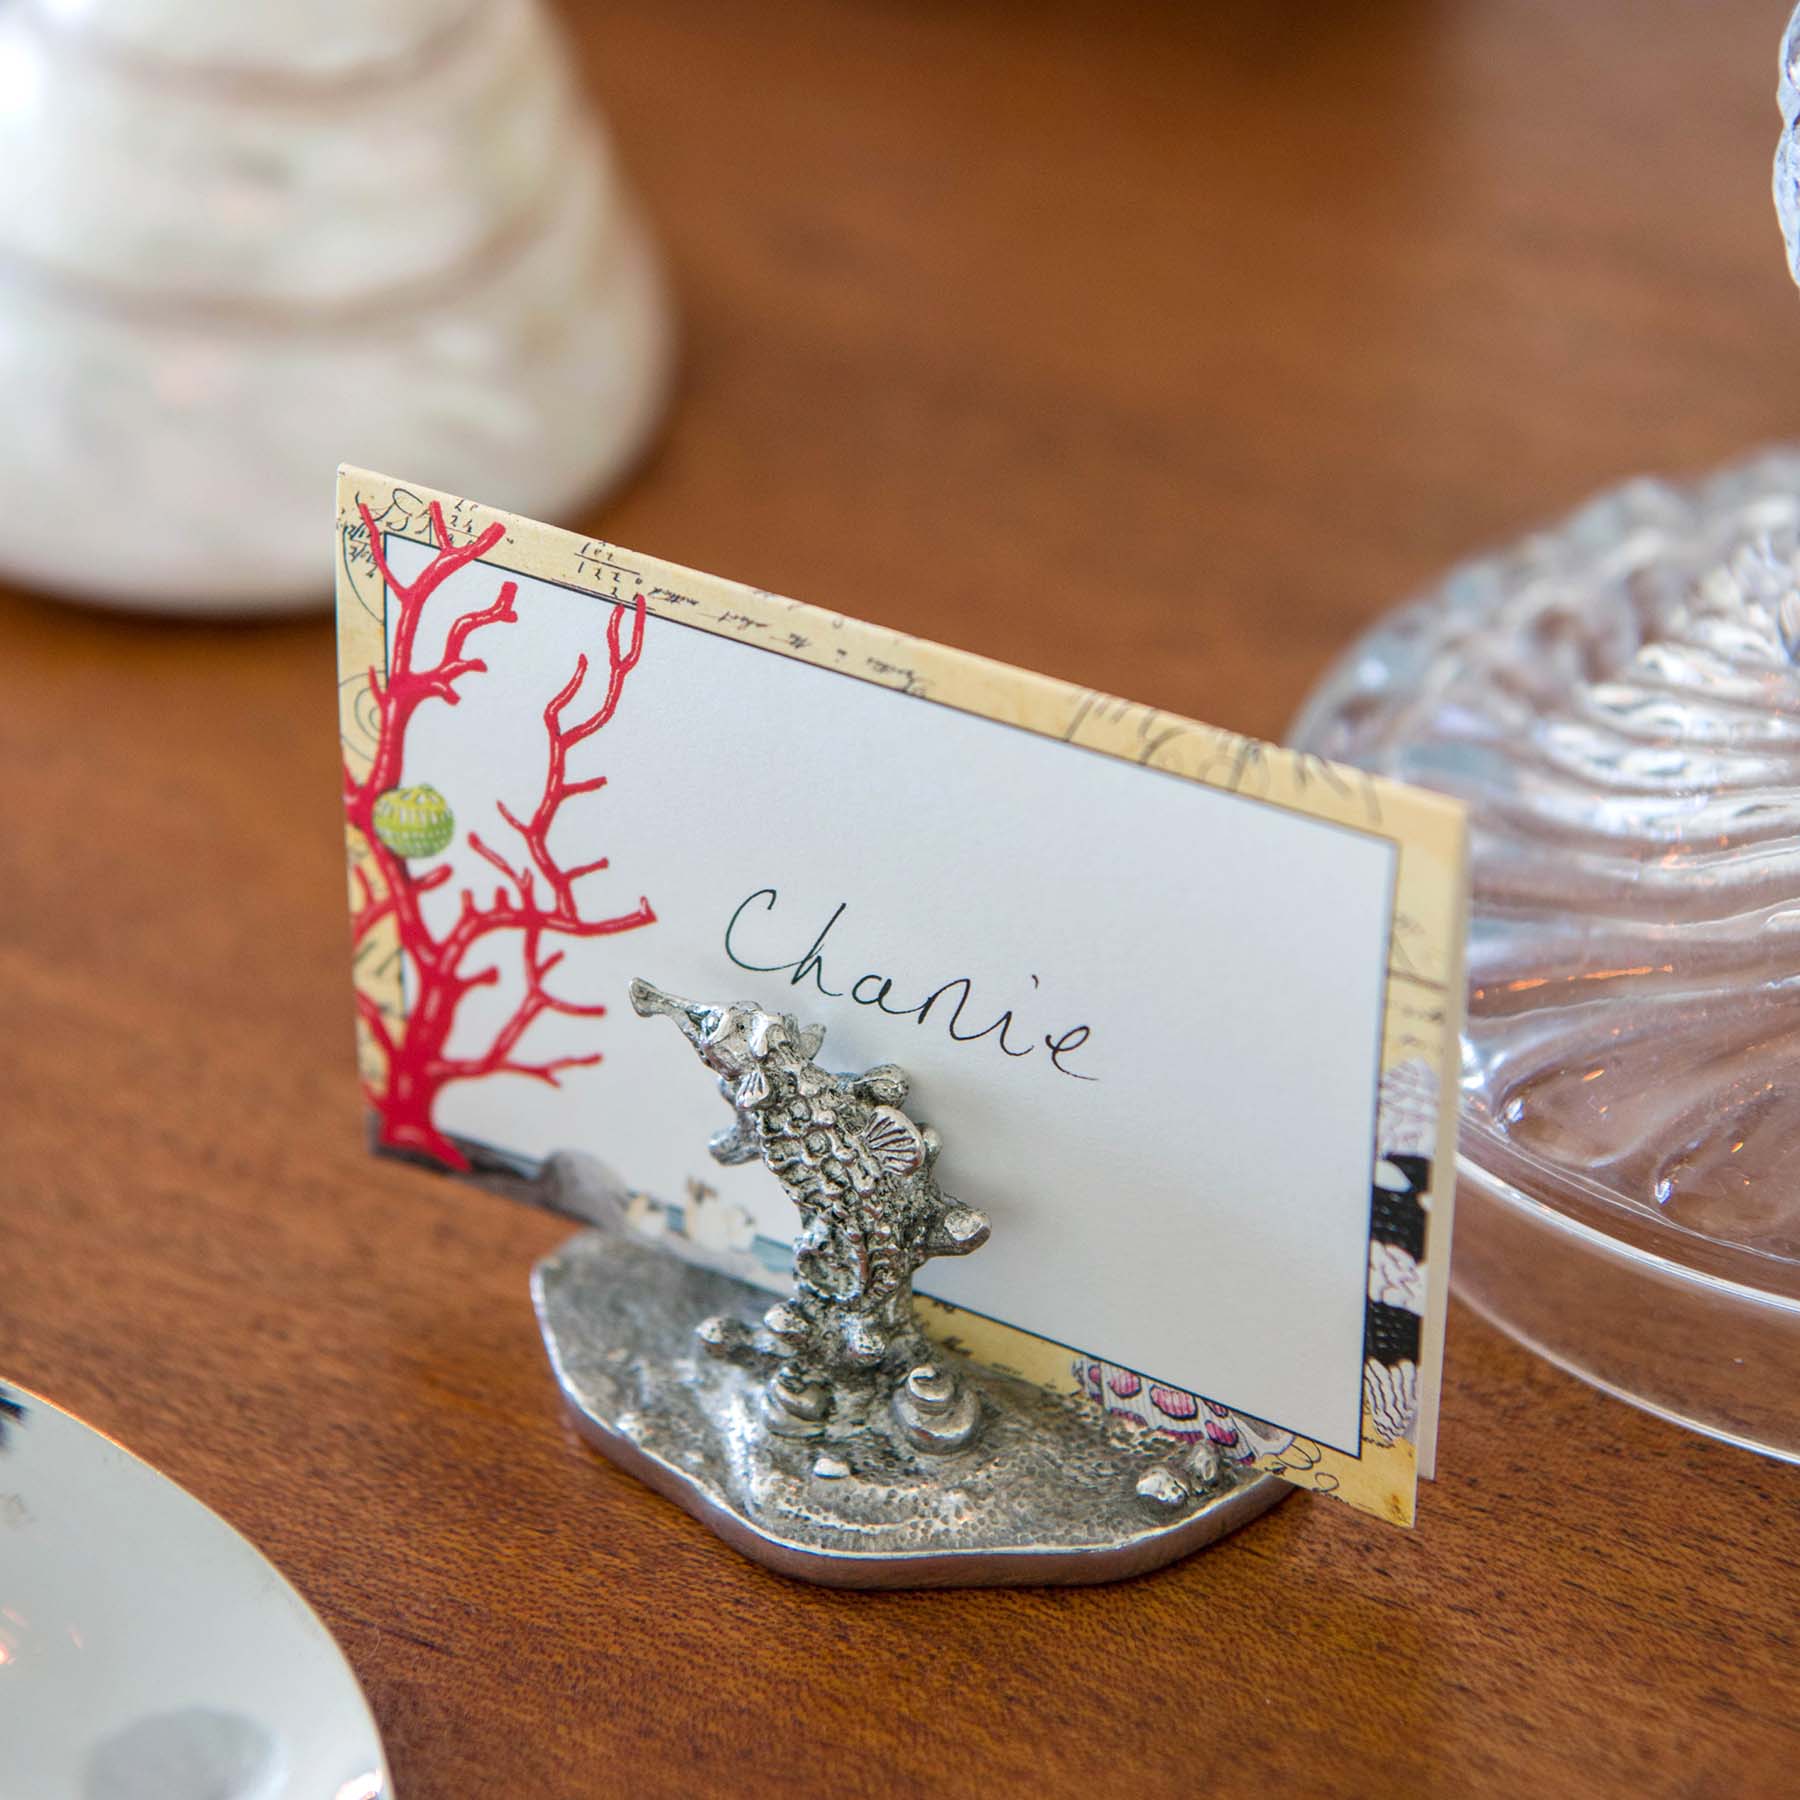 Pewter Coral & Seahorse Card Holder shown holding placecard and other items on a table